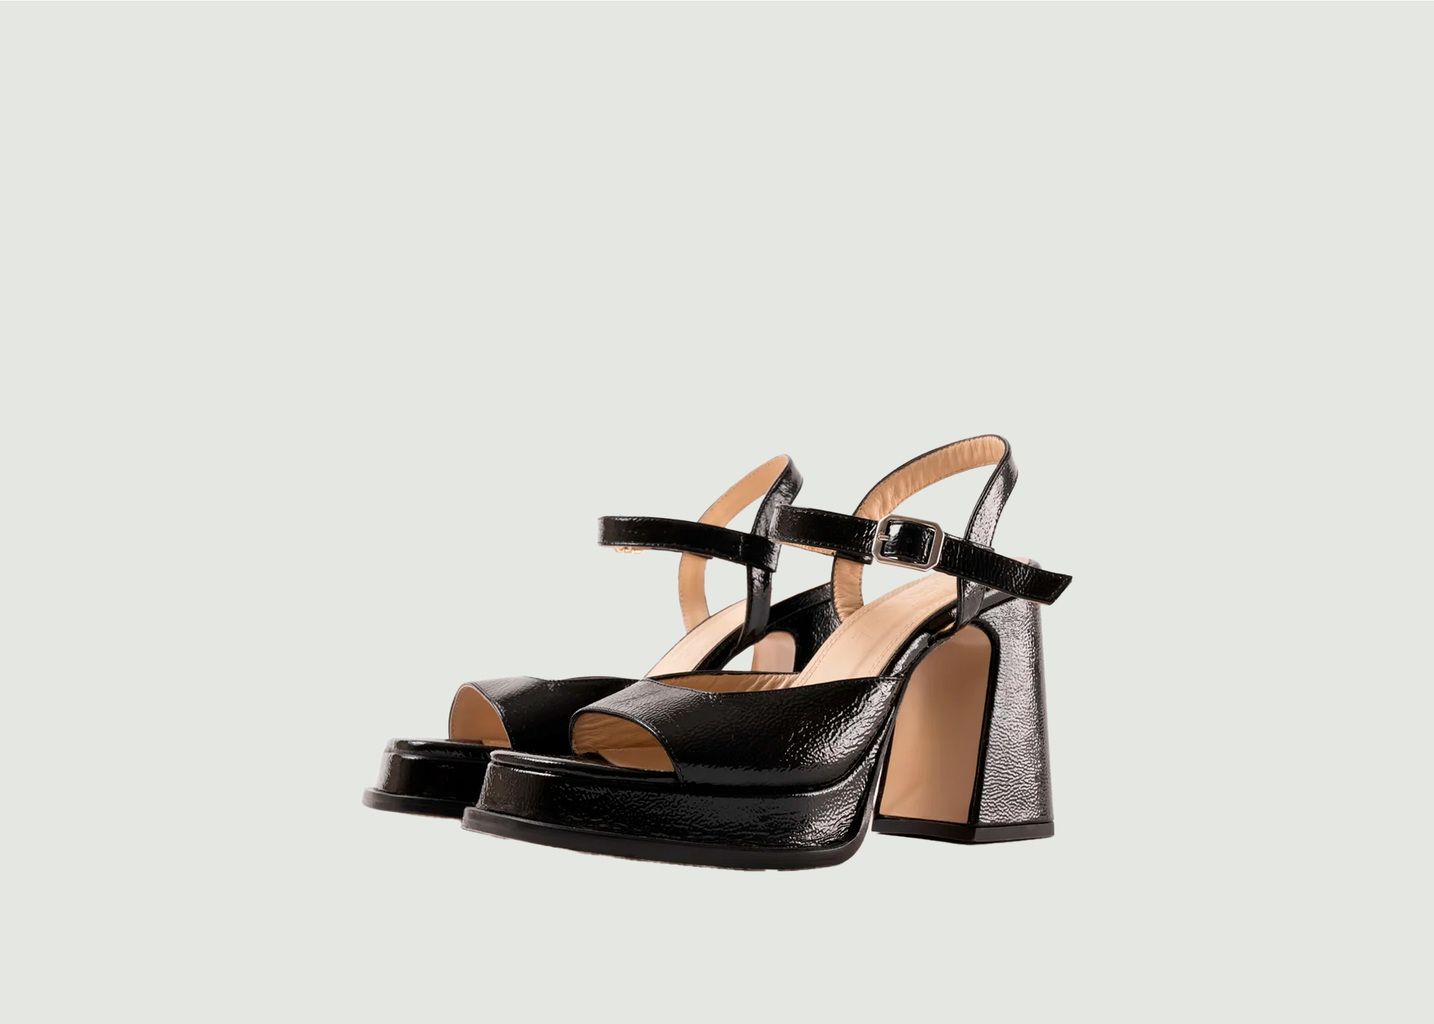 Heeled platform sandals in crinkled patent leather Gracia - Souliers Martinez